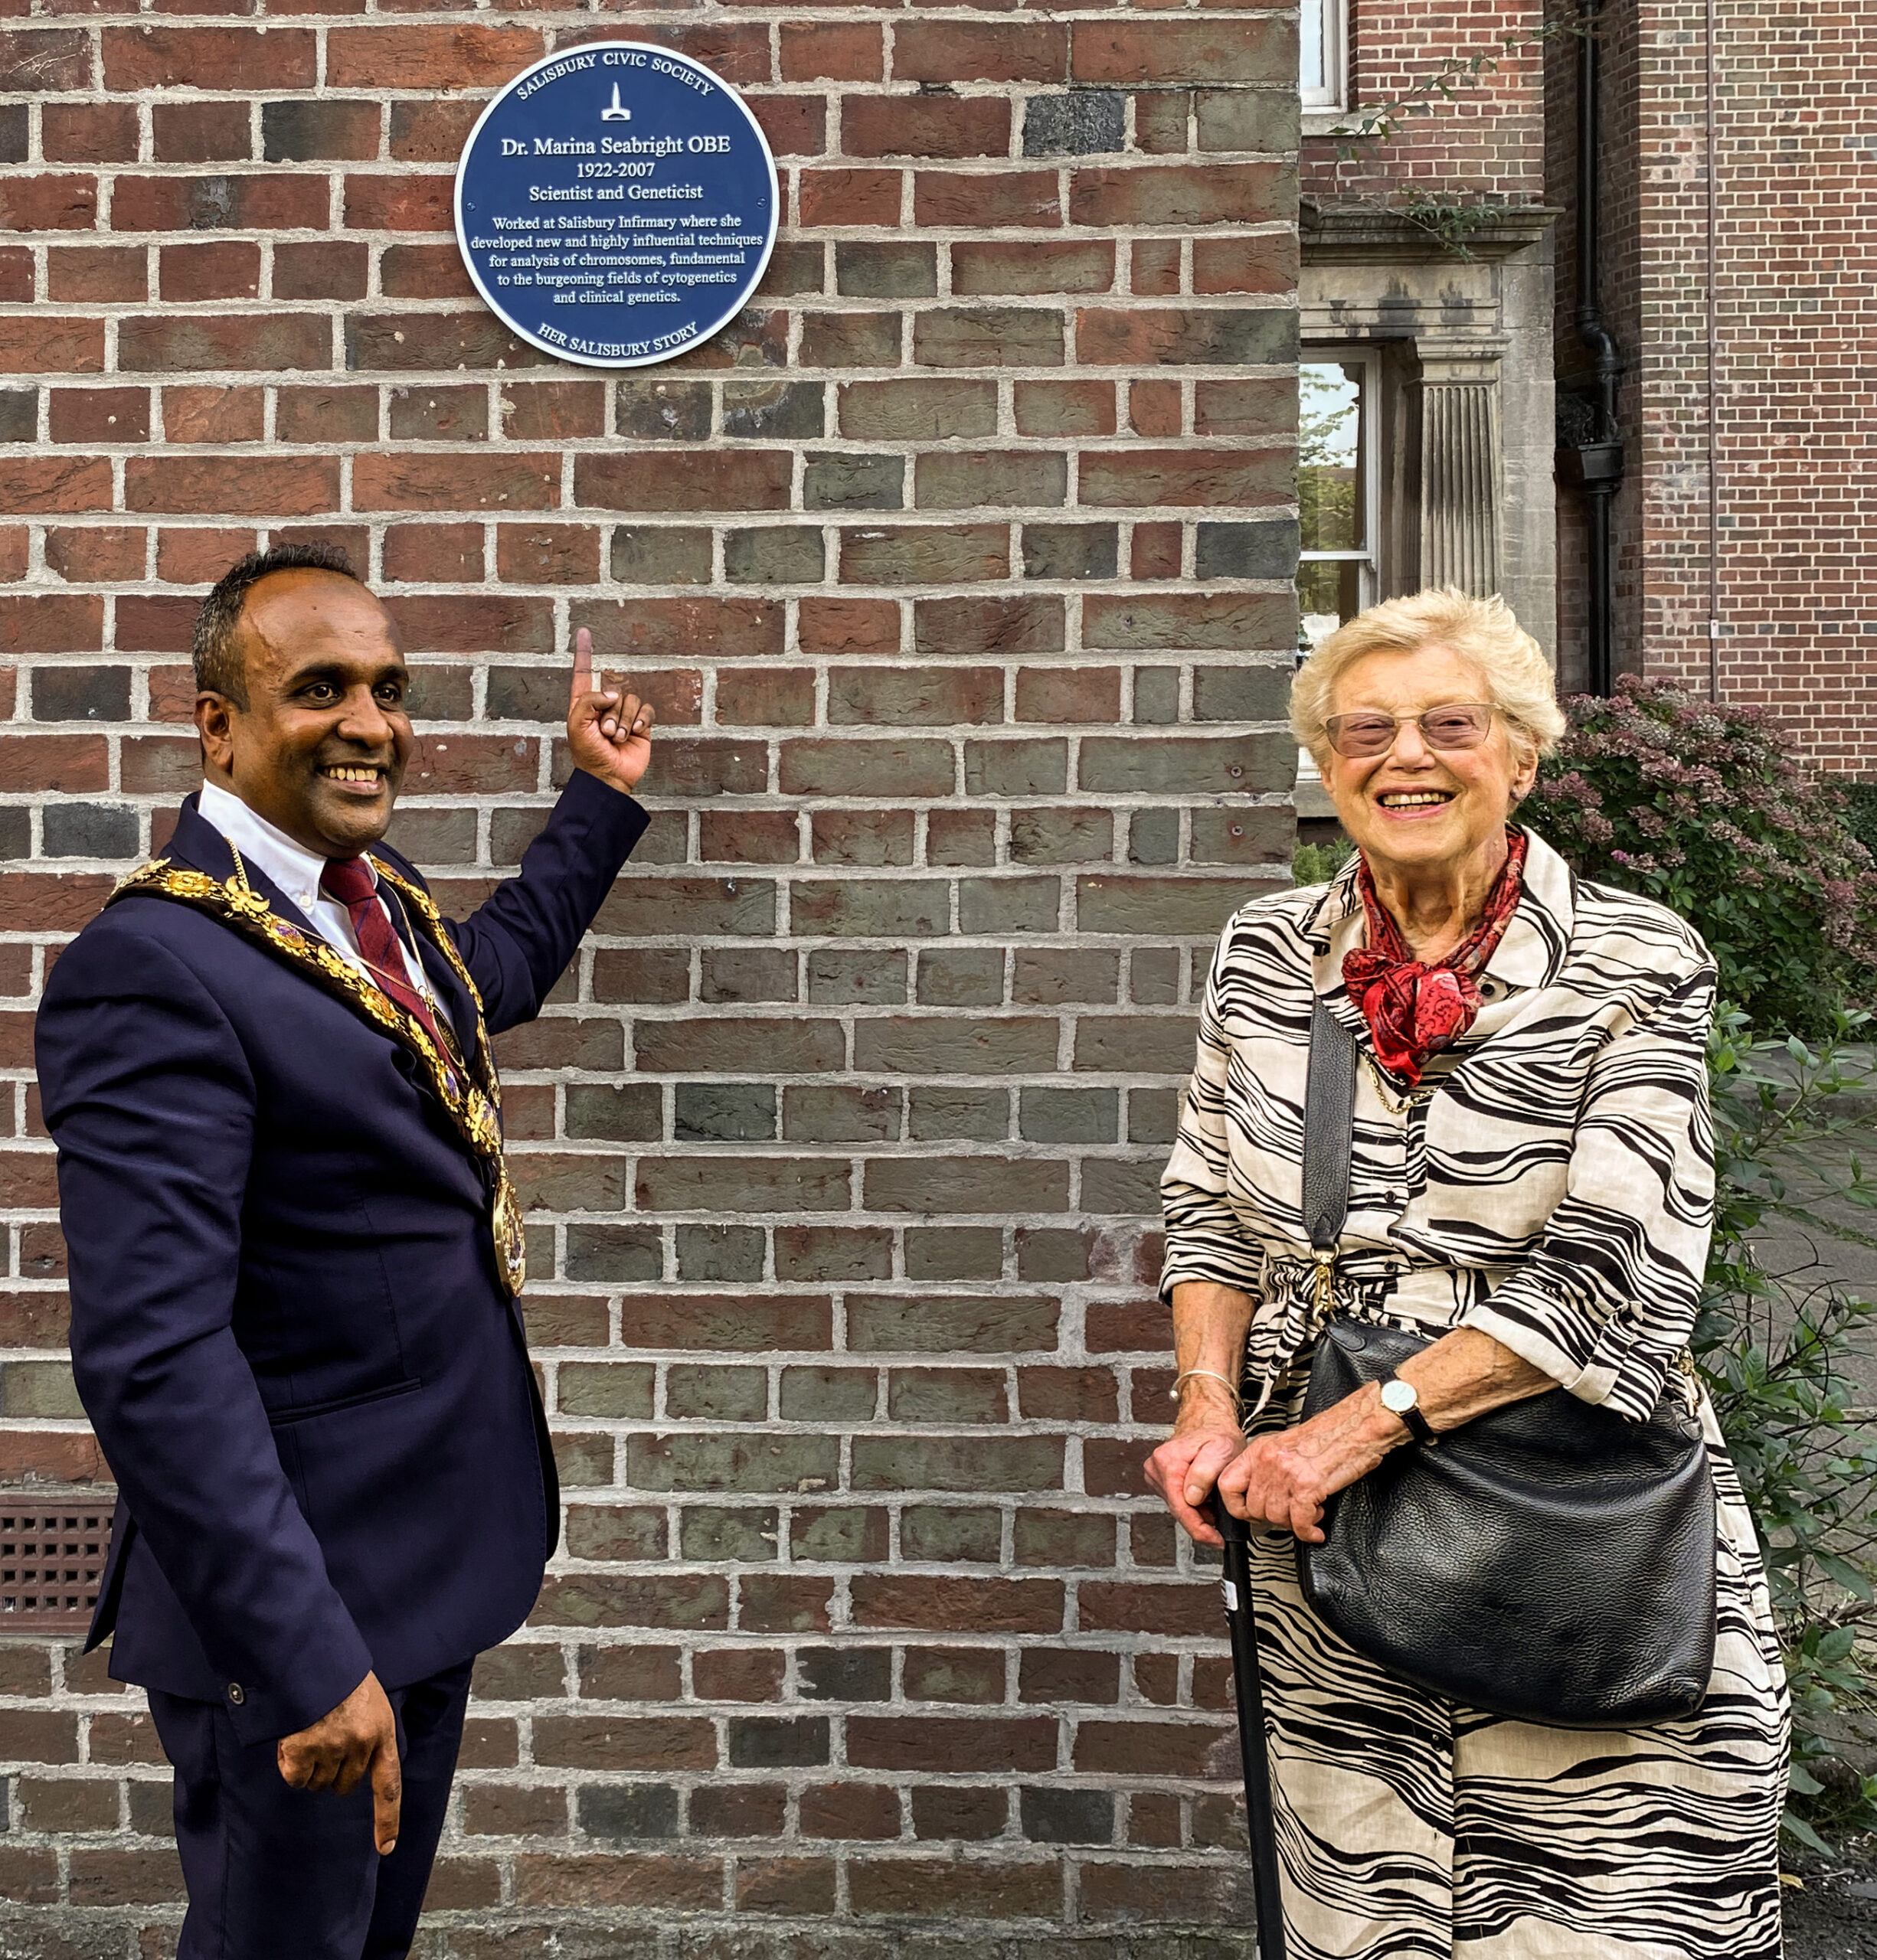 Mayor of Salisbury, Atiqul Hoque, and Dame Rosemary Spencer, Patron of the Civic Society, after the reveal